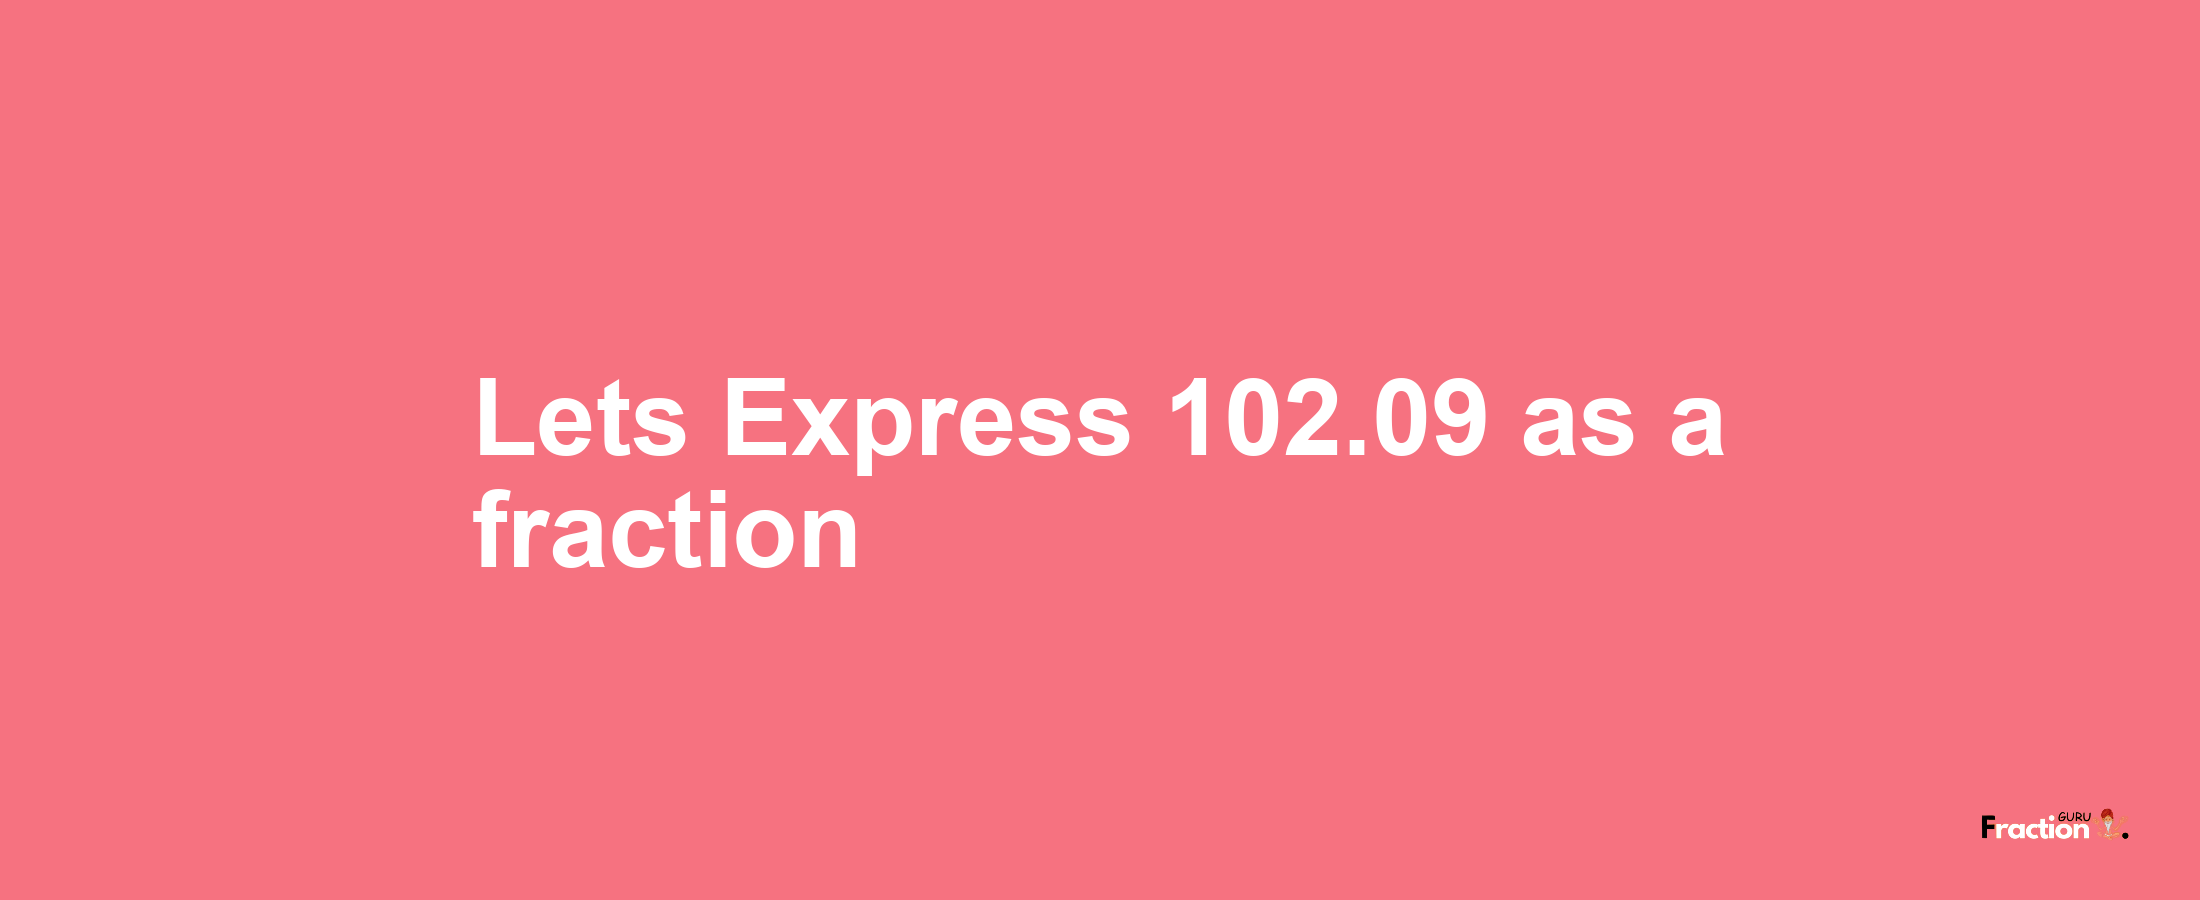 Lets Express 102.09 as afraction